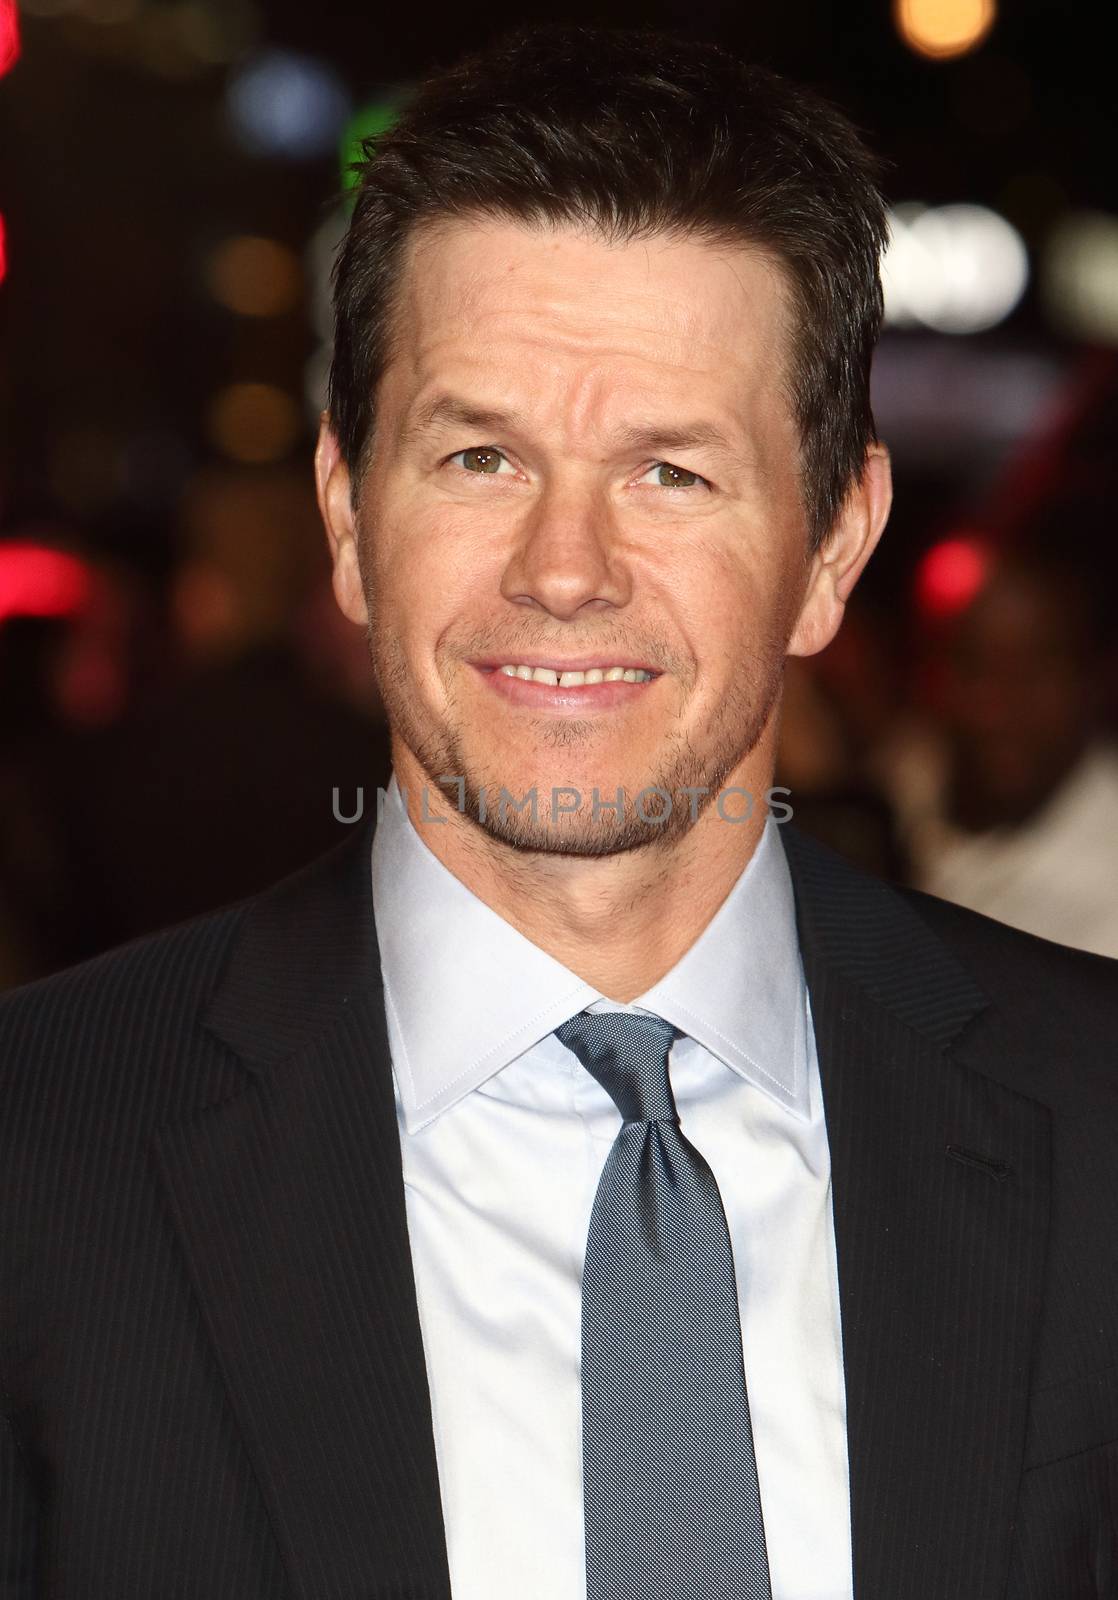 UK, London: Mark Wahlberg and Will Ferrell graced the red carpet in London for the UK Premiere of their new film Daddy's Home on December 9, 2015.